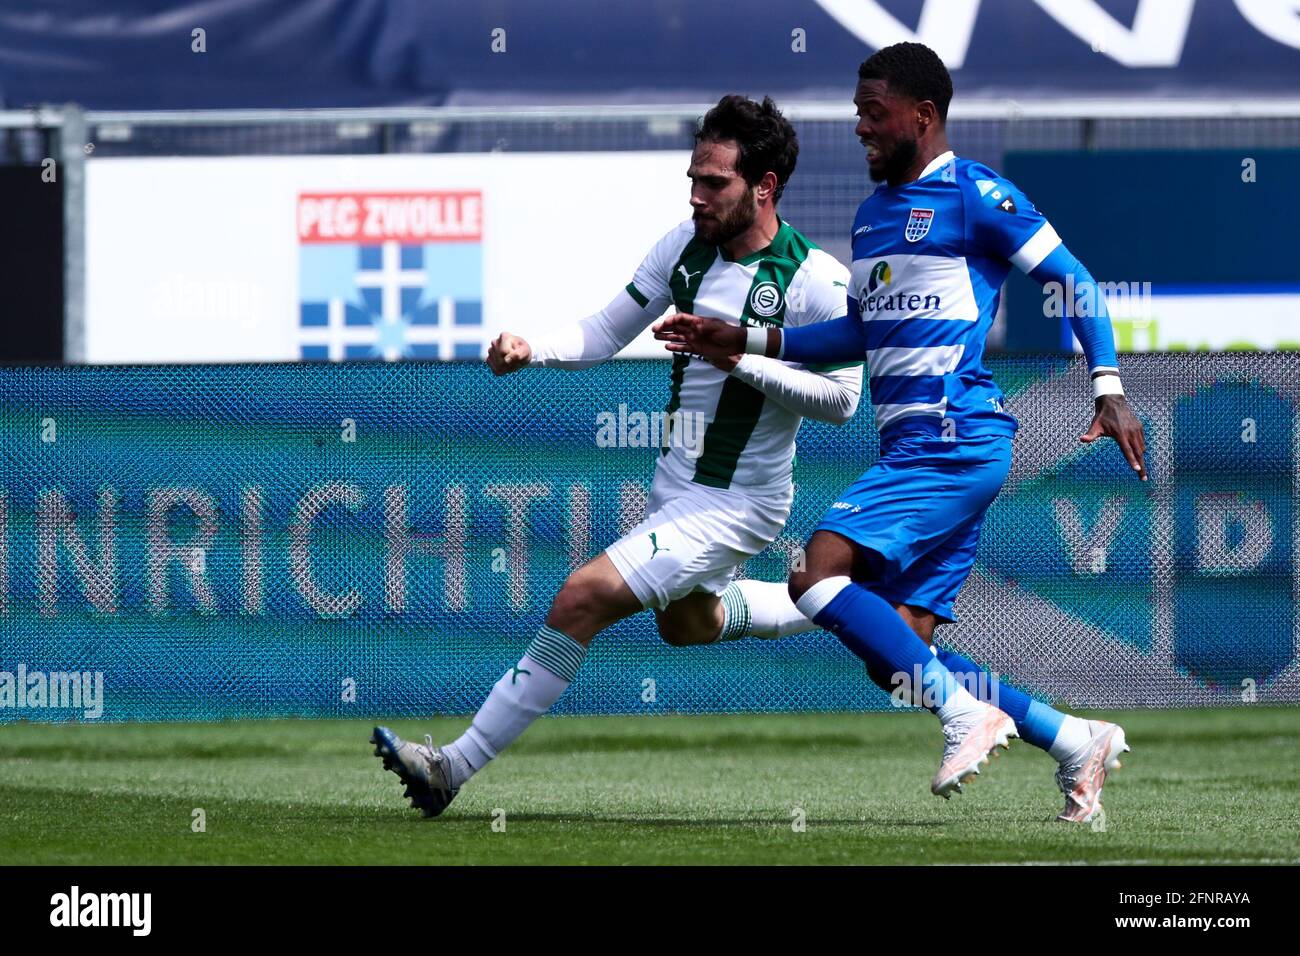 ZWOLLE, NETHERLANDS - MAY 16: Kenneth Paal of PEC Zwolle, Miguel Angel Leal Diaz of FC Groningen during the Dutch Eredivisie match between PEC Zwolle Stock Photo